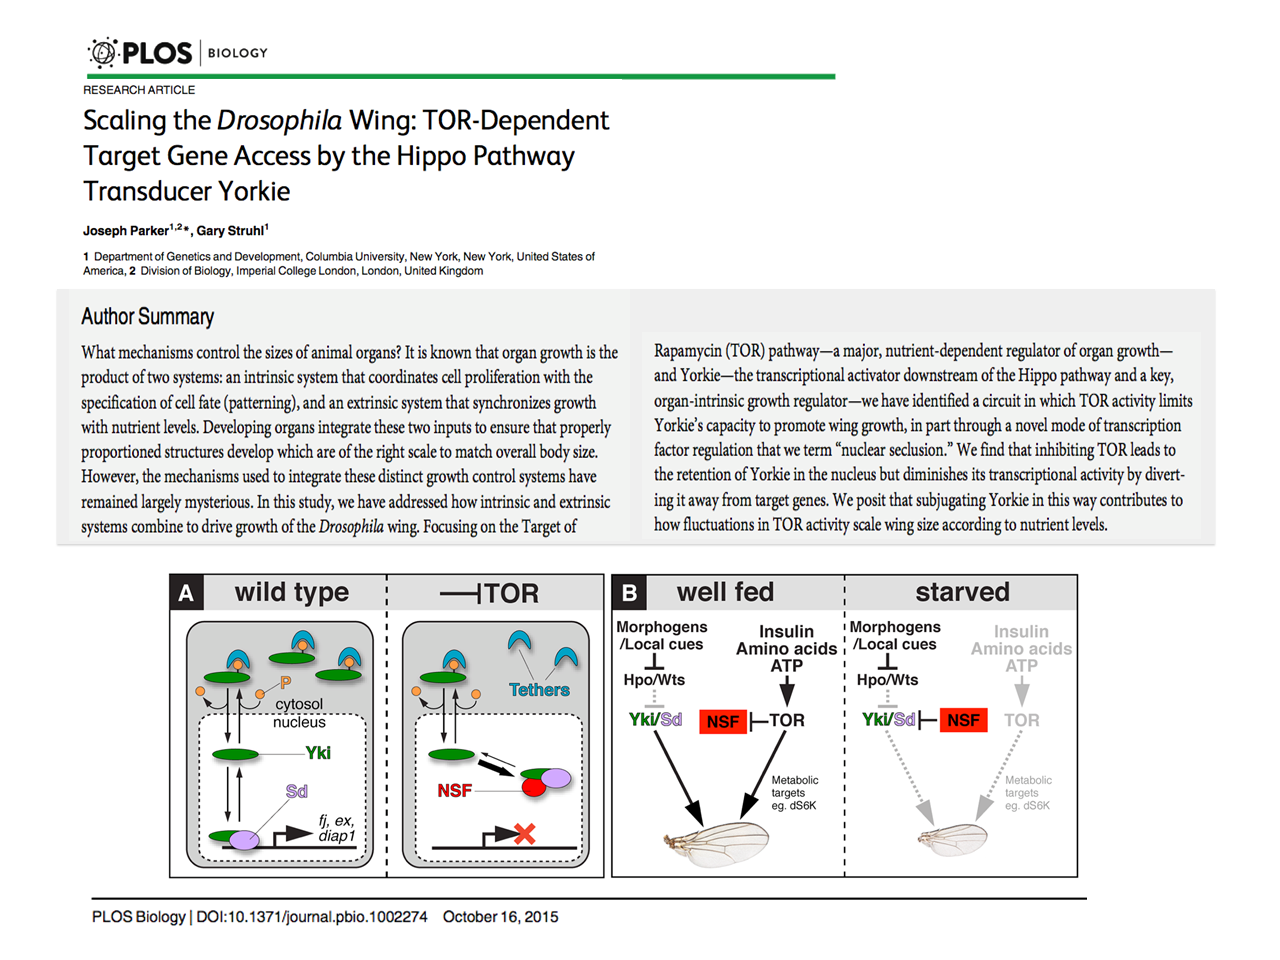 Plos Biology- Scaling the Drosophila Wing: TOR-Dependent Target Gene Access by the Hippo Pathway Transducer Yorkie